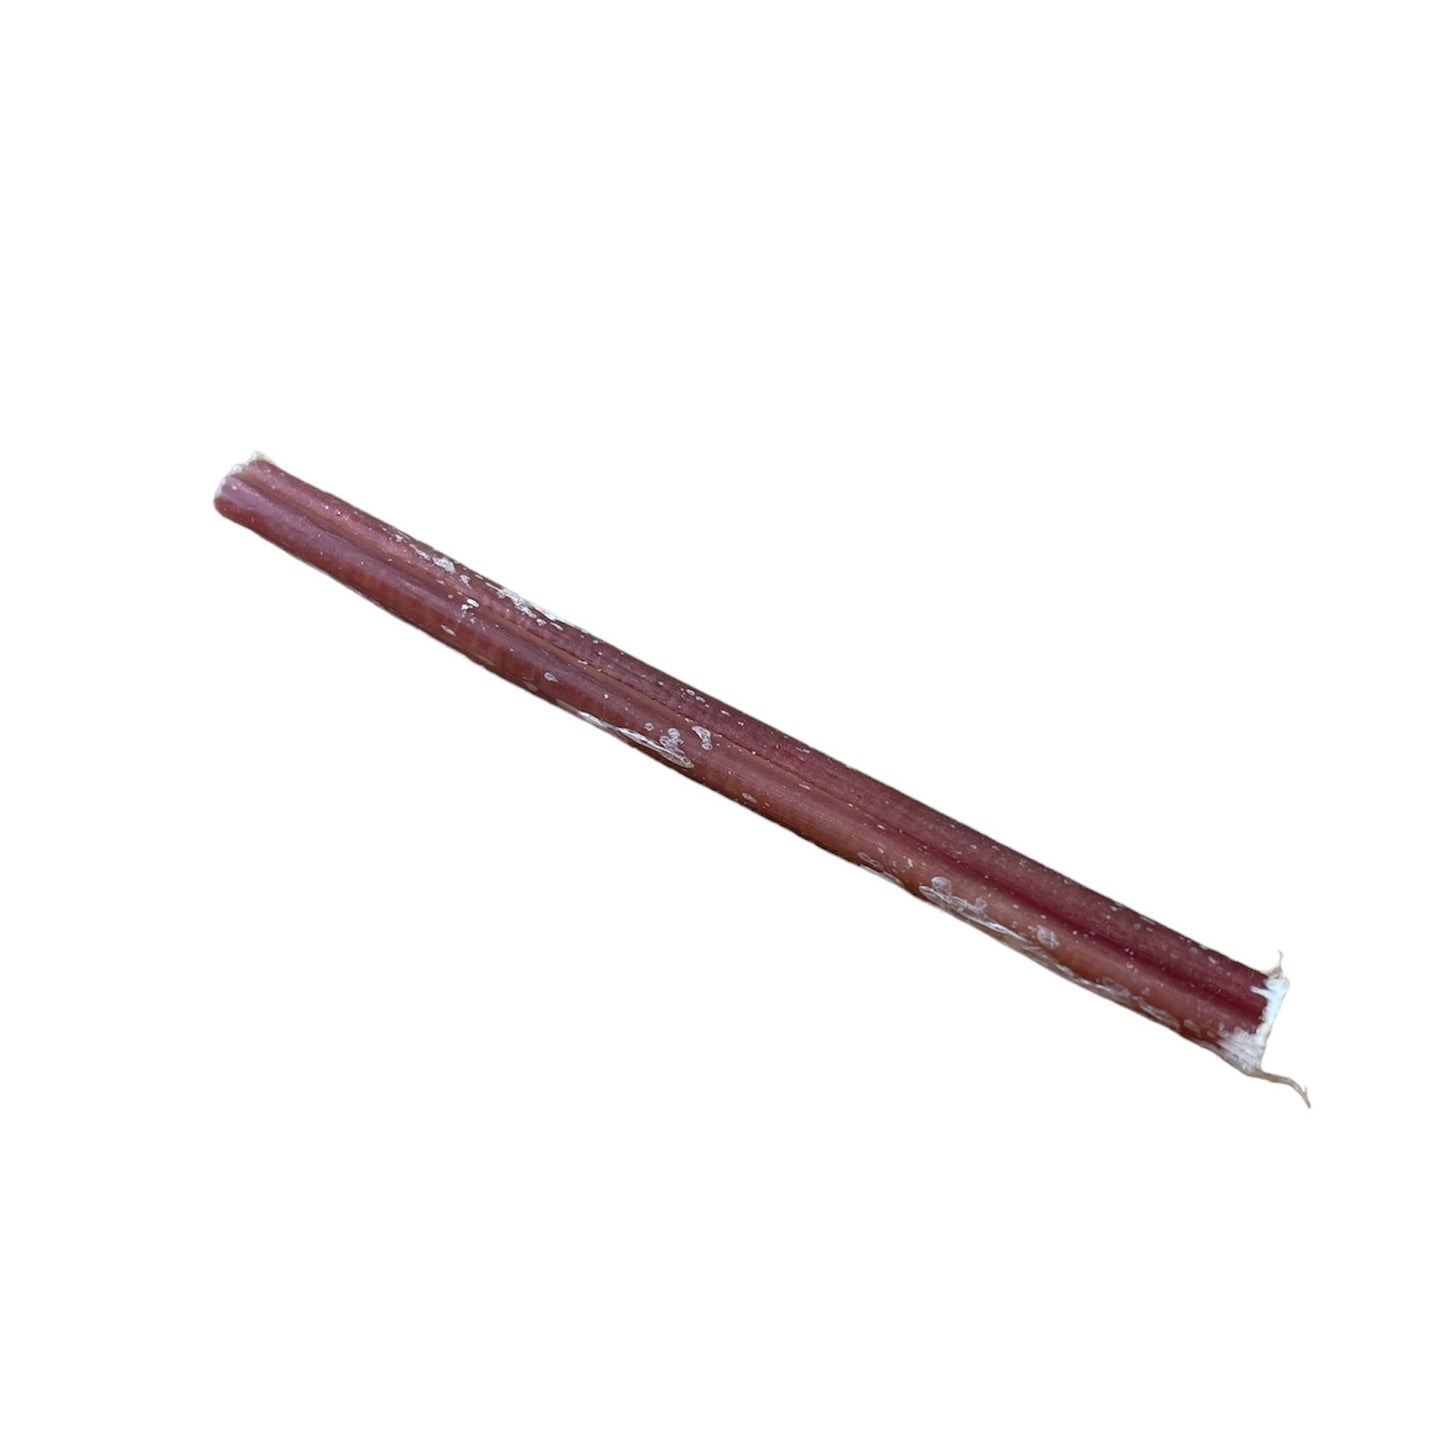 Beef Bully Stick Odour Controlled 6"- Skinny